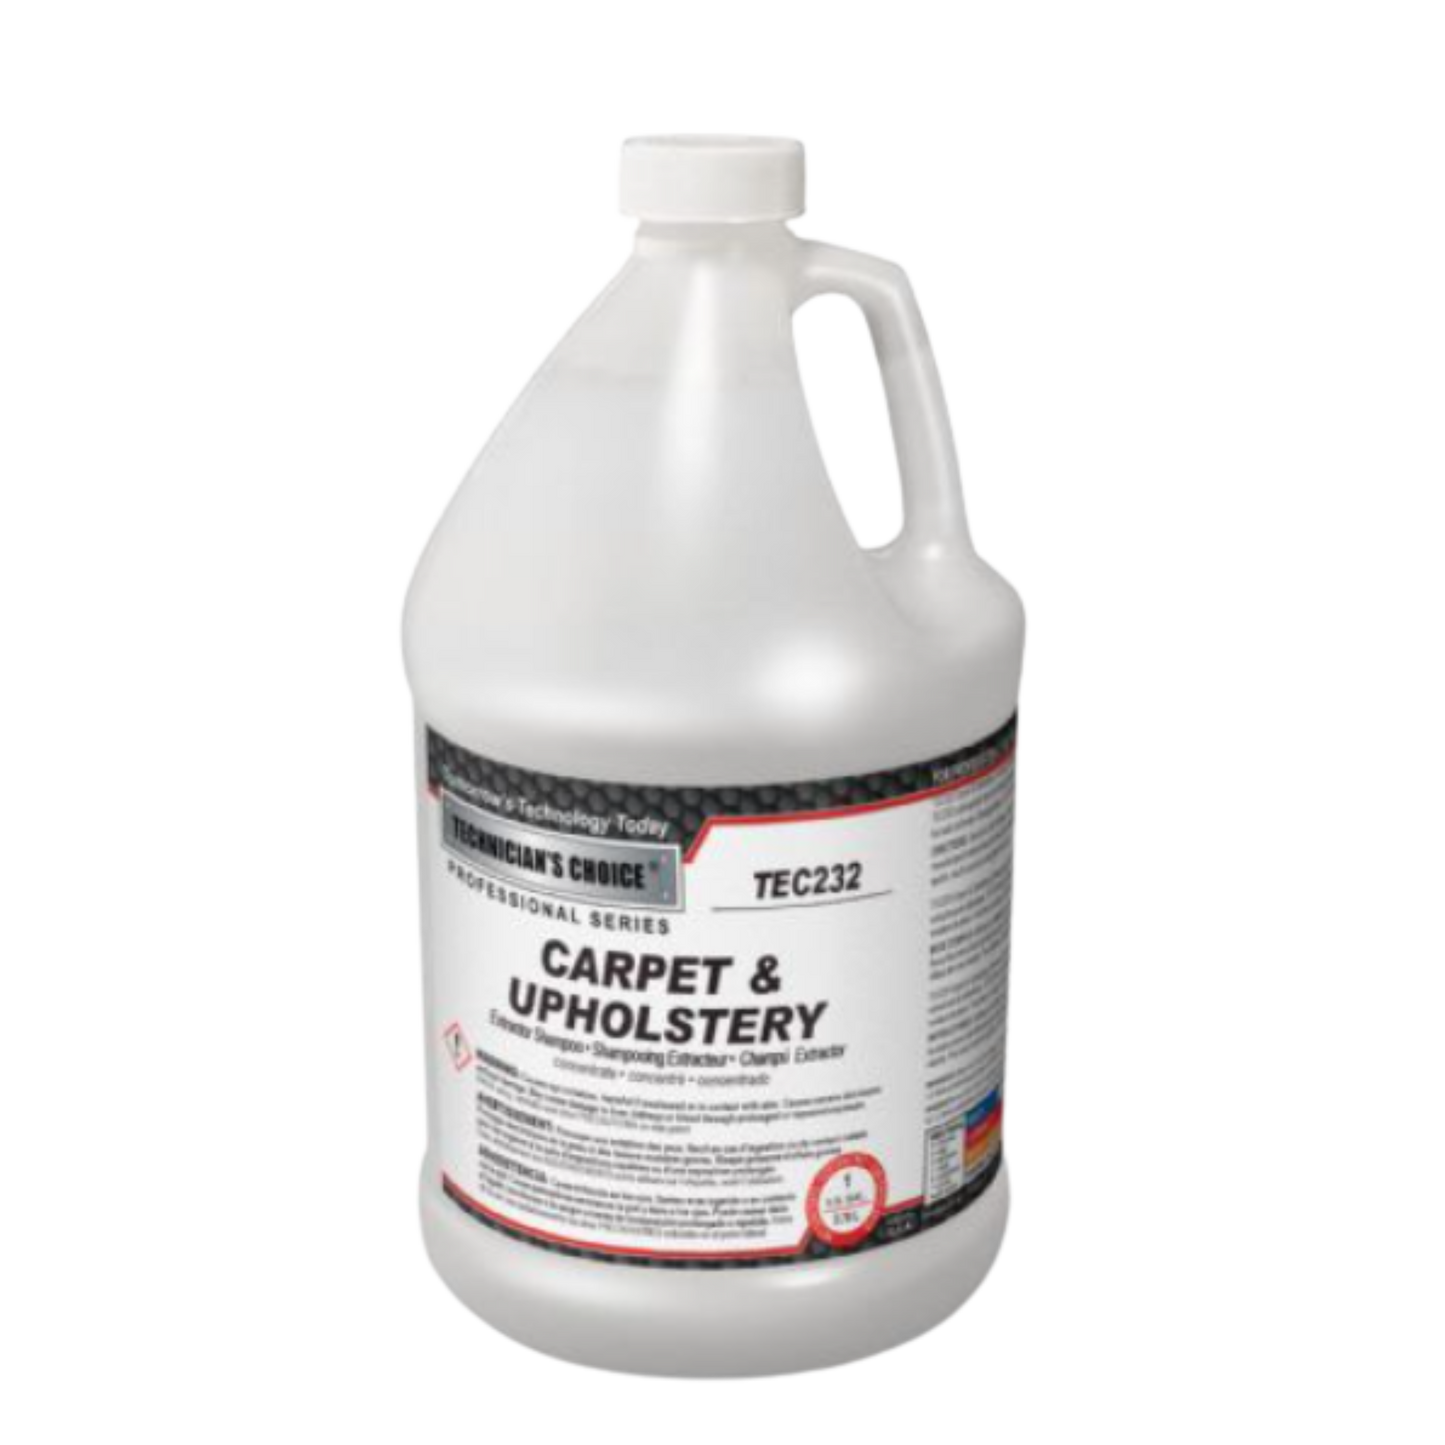 Carpet & Upholstery Extractor Shampoo 1 Gal